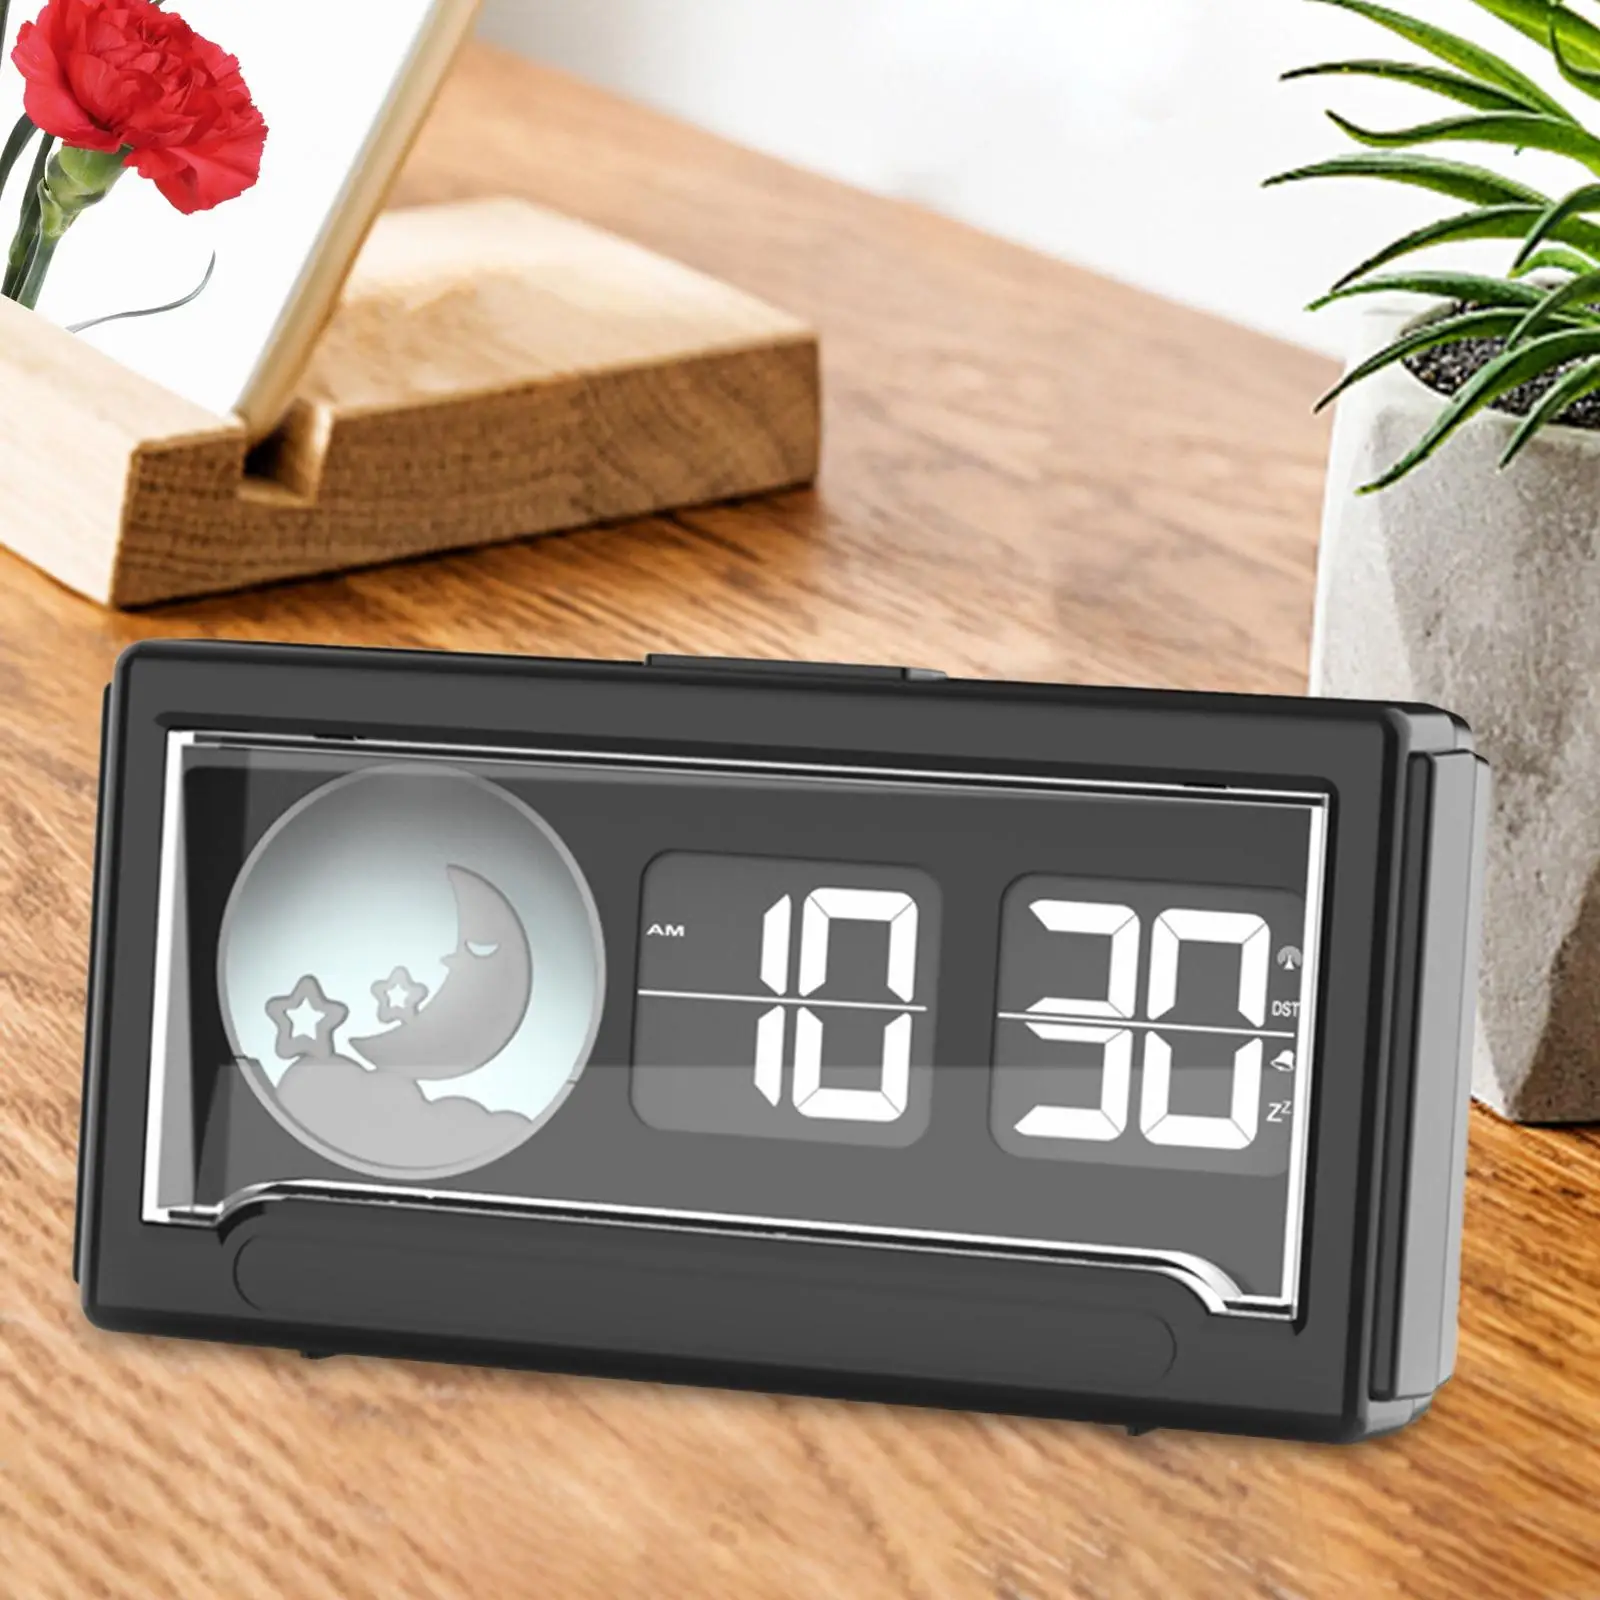 Auto Flip Clock Timepiece Desk Clock Flip Page Turning Clocks Retro Table Clock for Office Kitchen Home Bedrooms Decoration